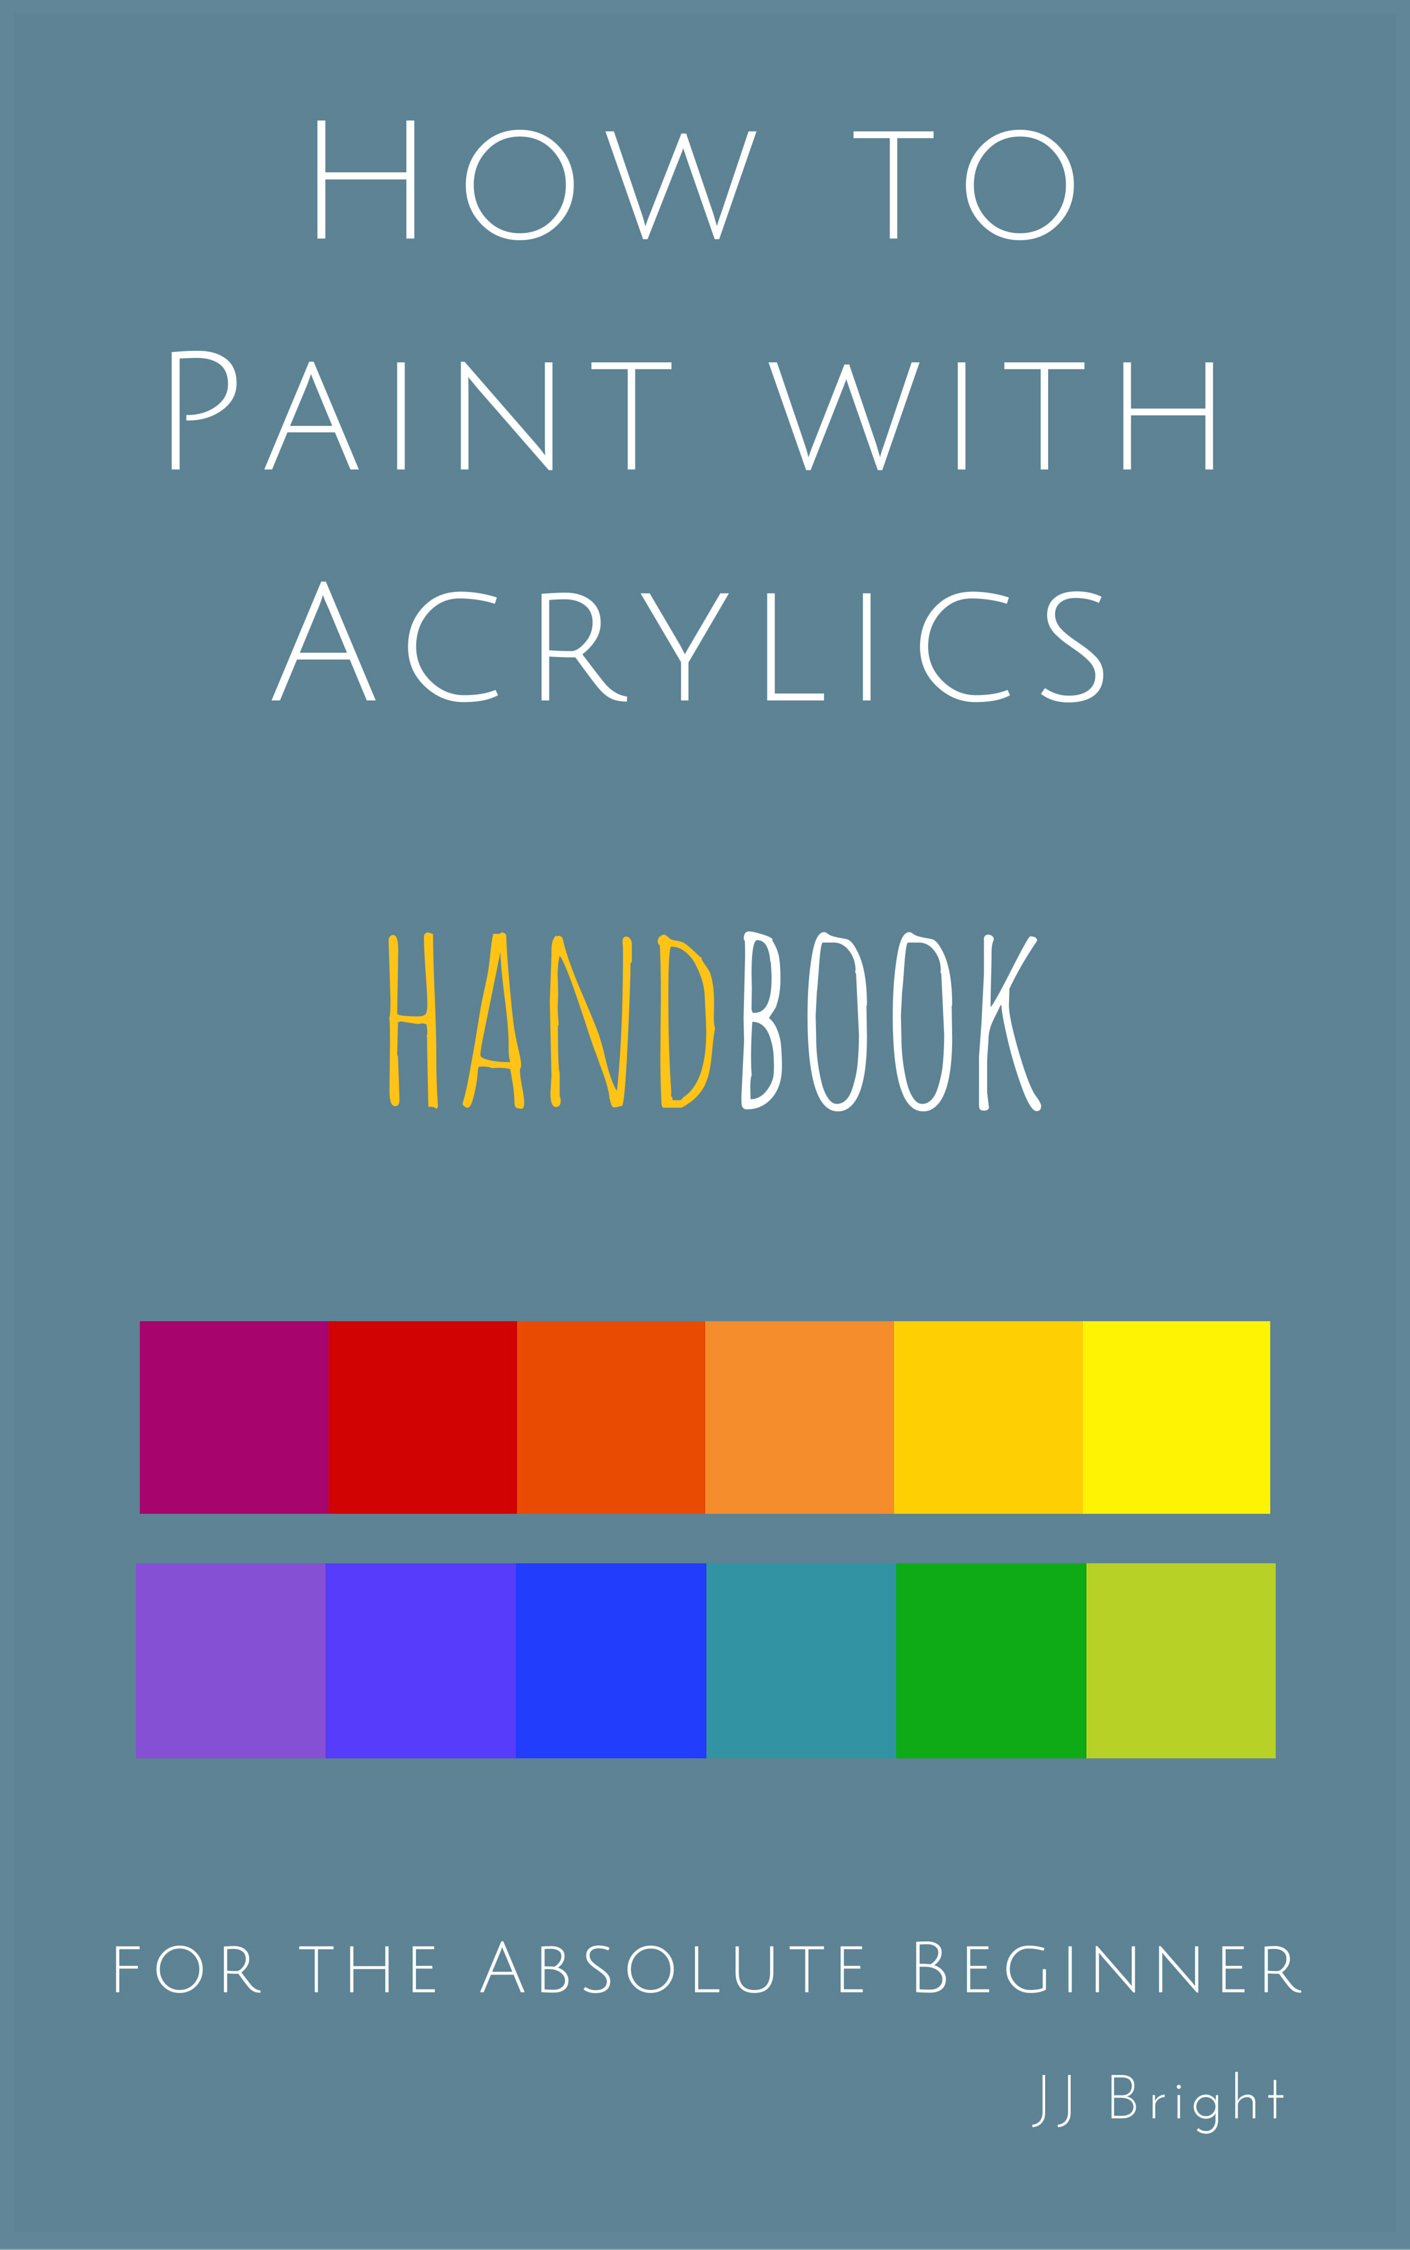 how to paint wcreating art teaches us learn how to paint with acrylics handbook artith acrylics handbook learn to paint art